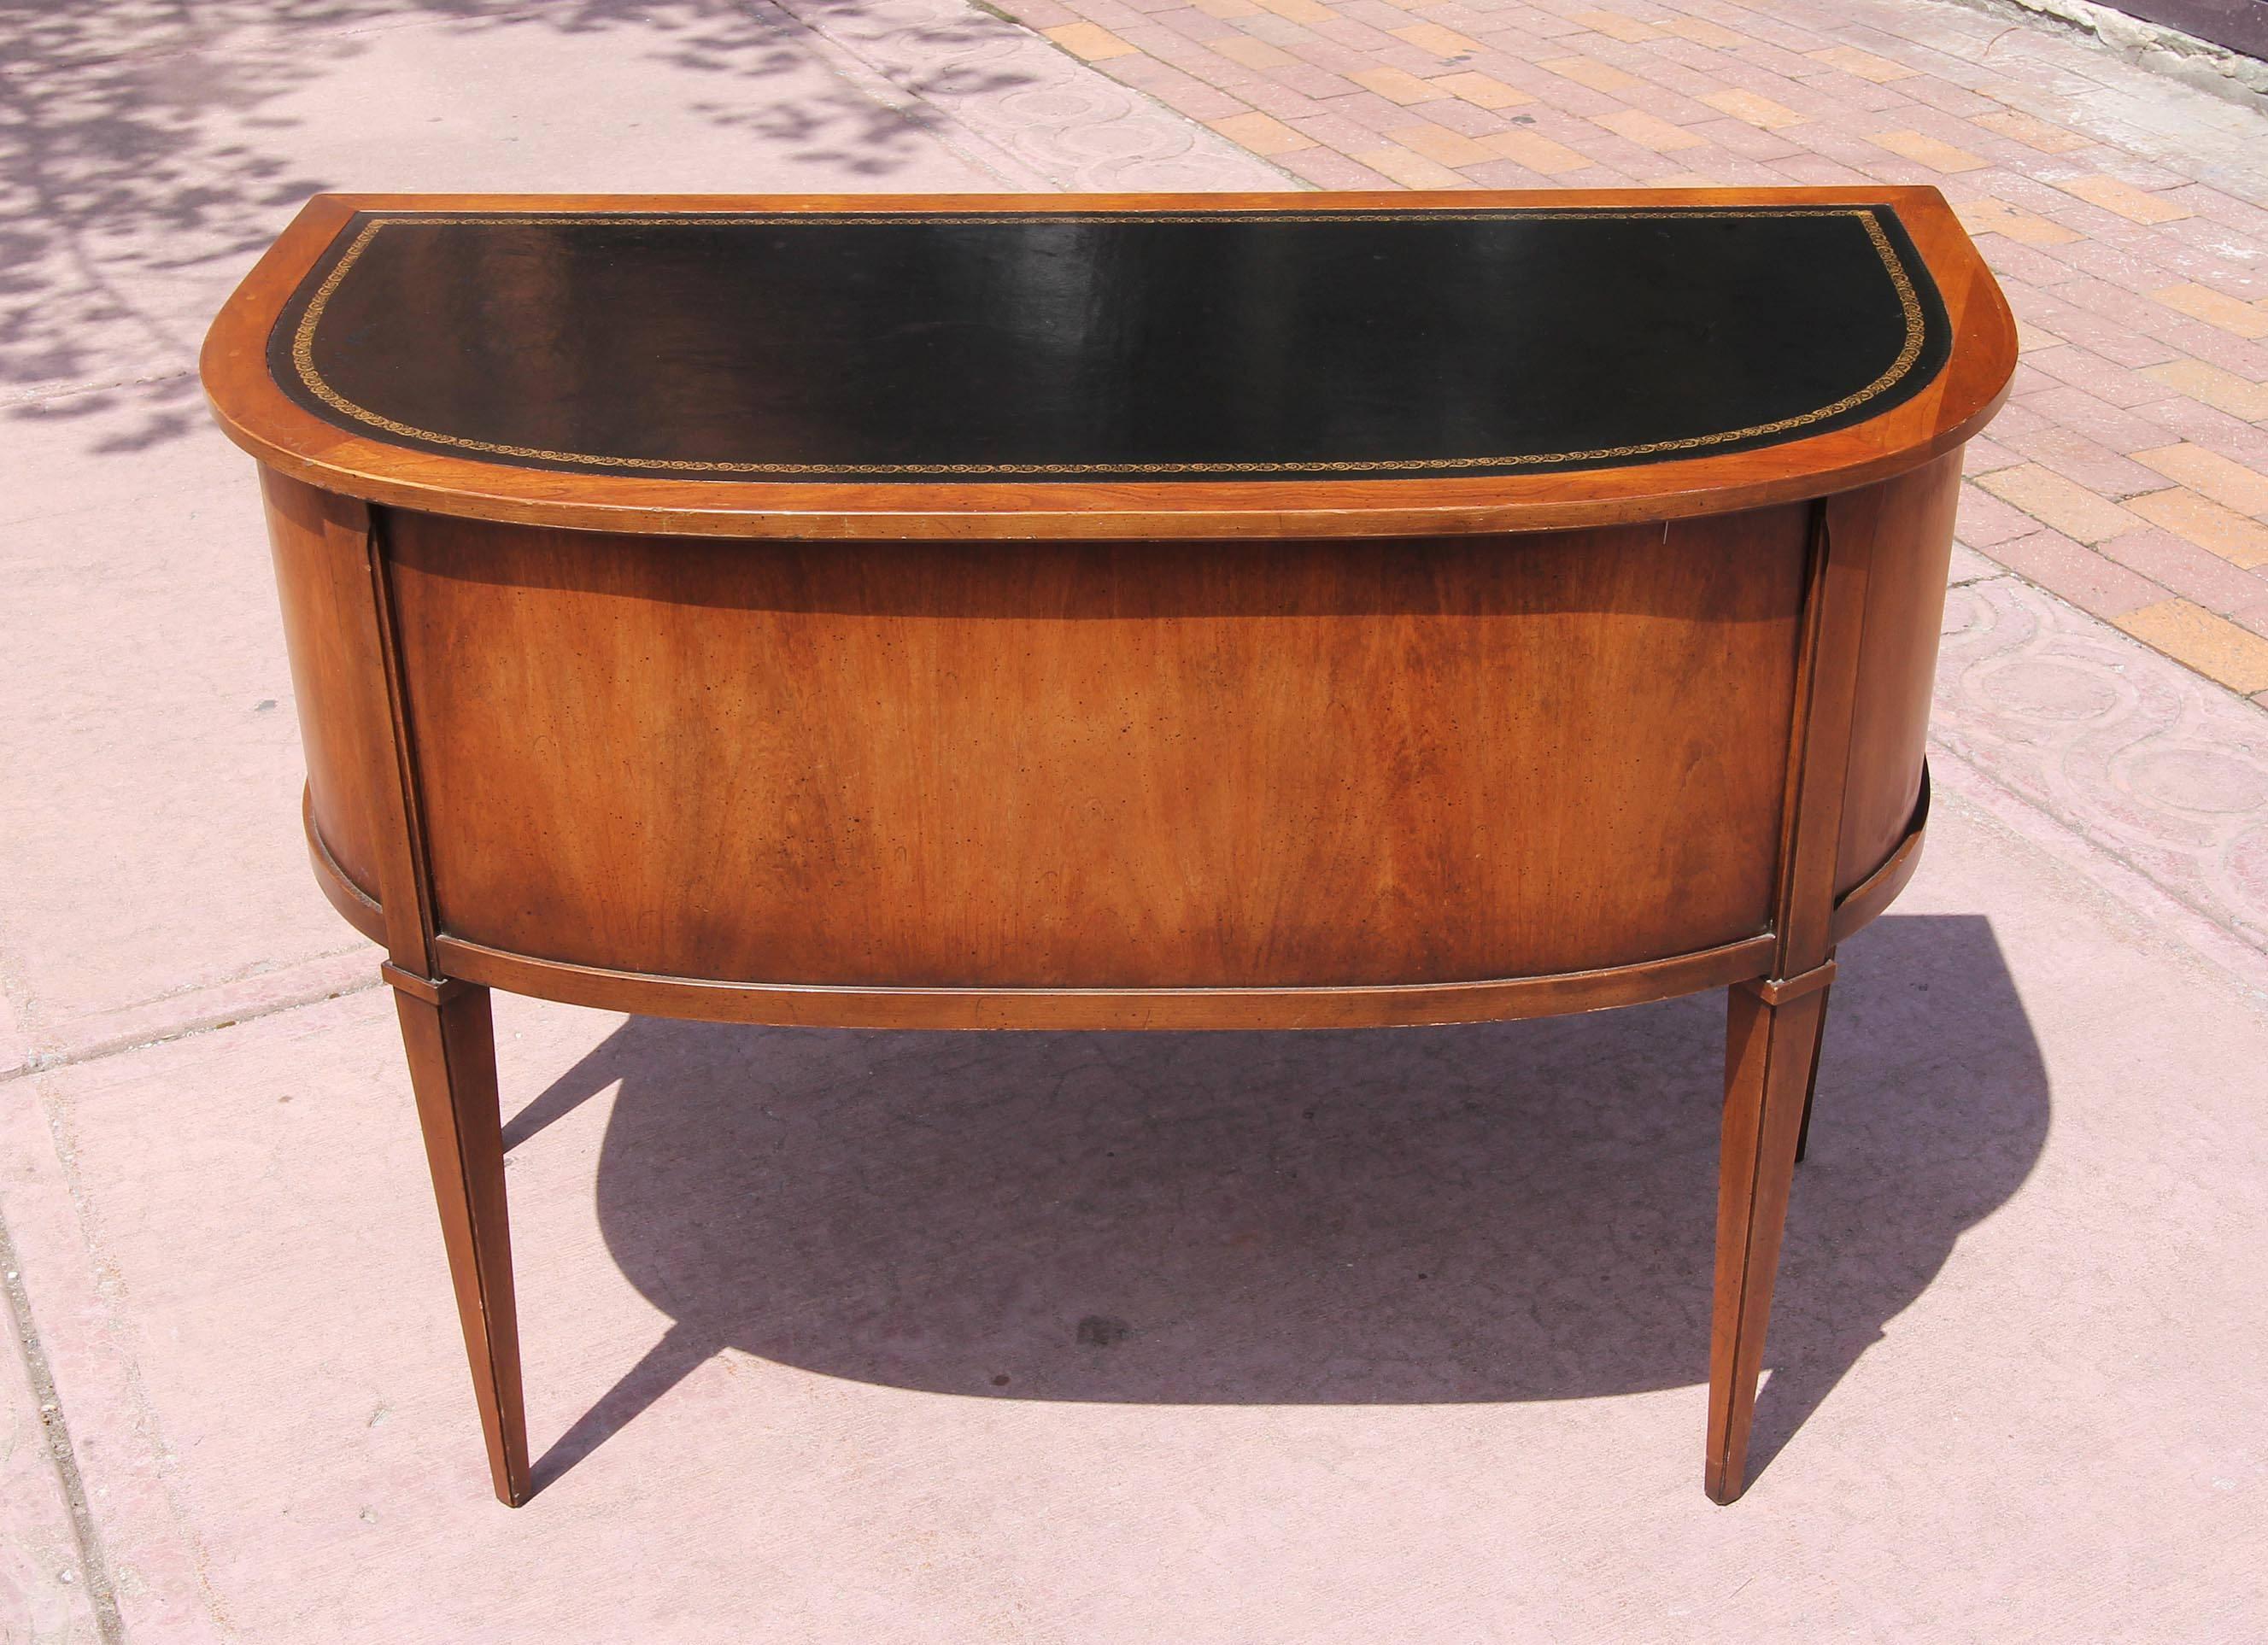 Vintage neoclassical desk with tooled leather top. Made by Sligh-Lowry. Pecan wood, circa 1960s.